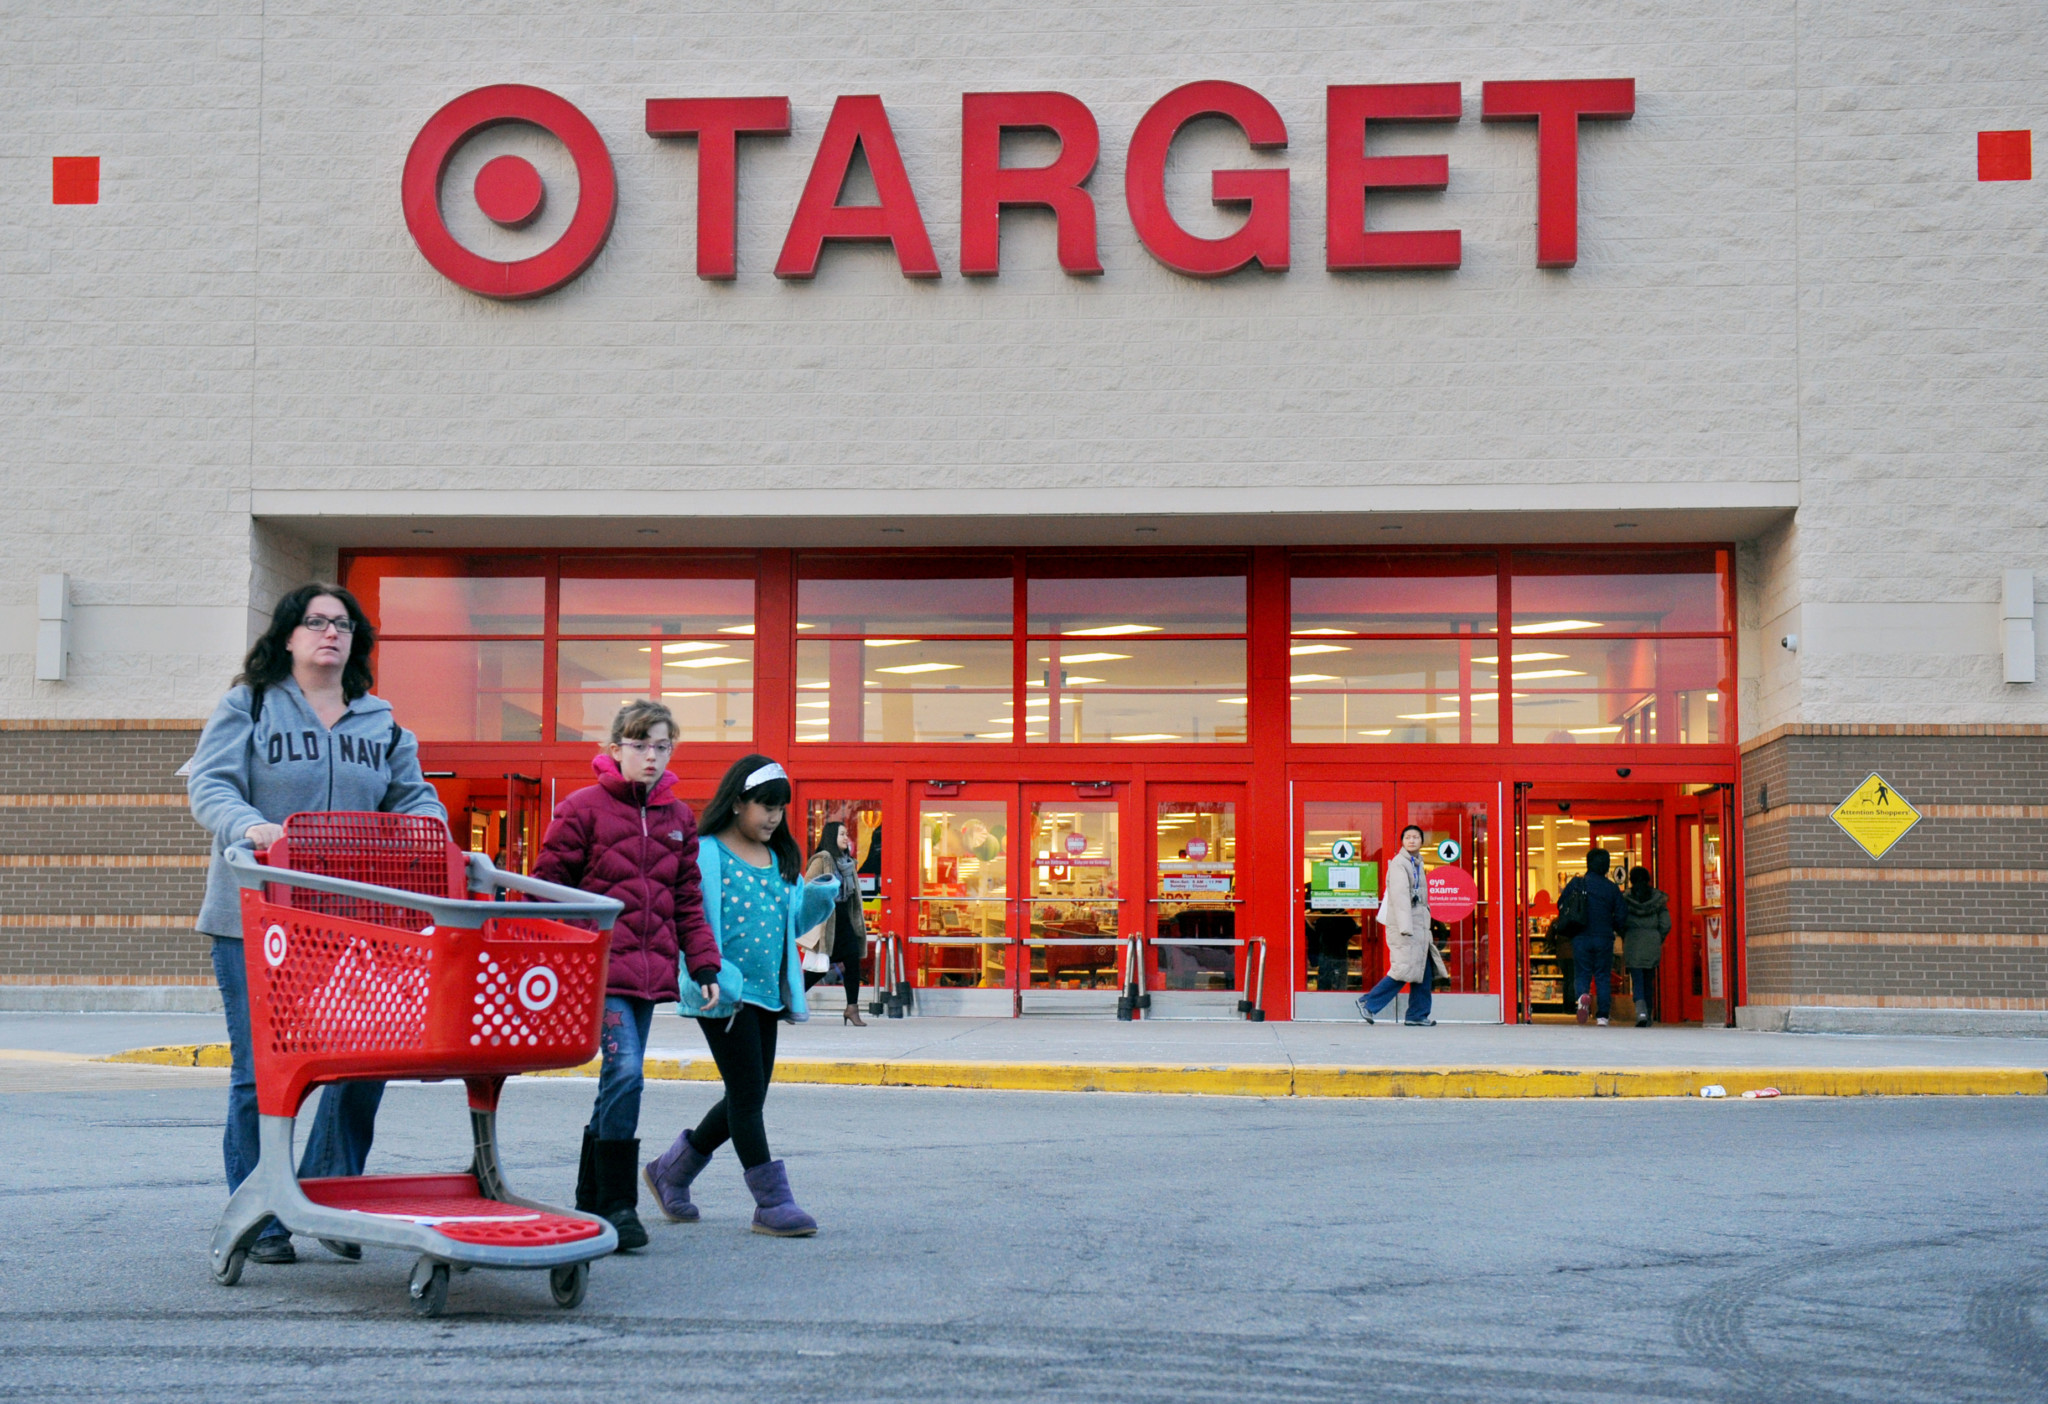 Target Security Breach Affects Up To 40M Cards TPM Talking Points Memo